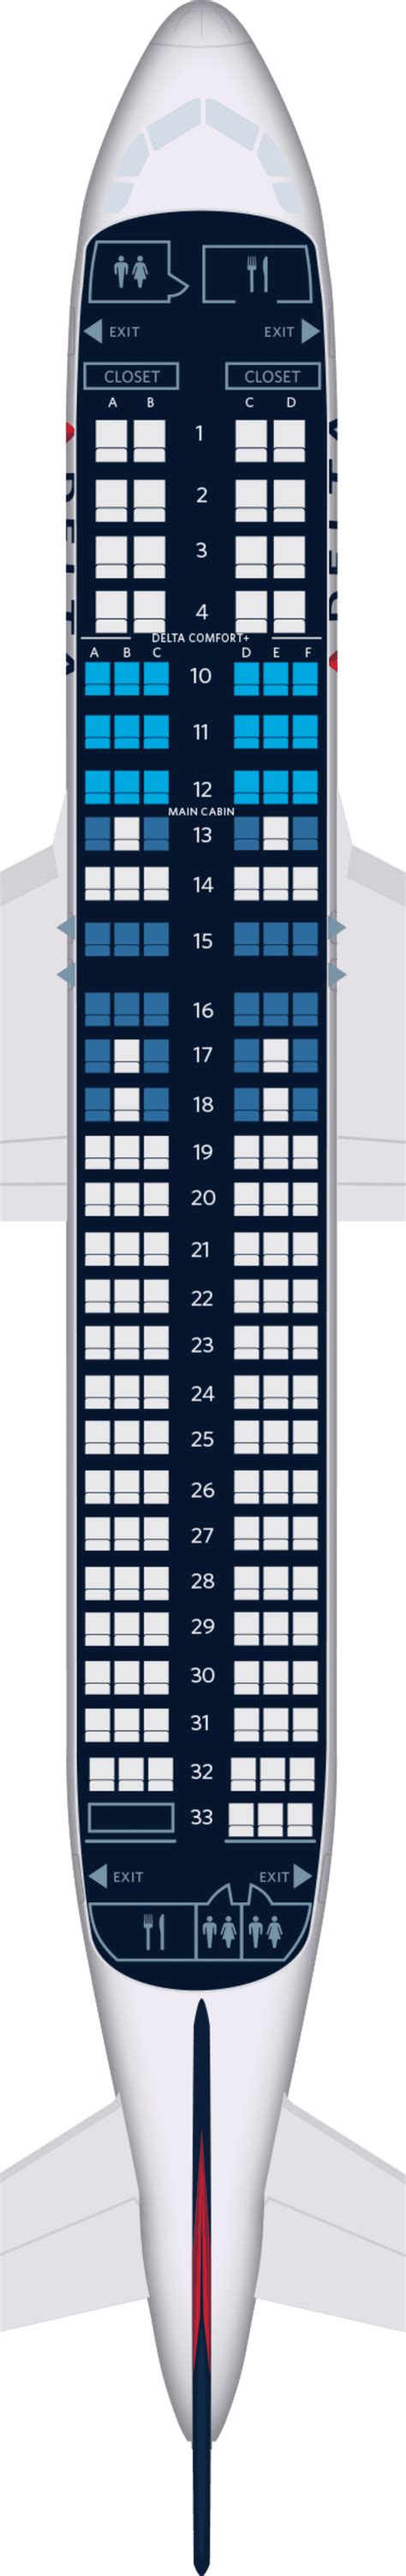 Airlines Seating Charts Seat Maps Airbus A319 A320 A330 A380 Flights 68d